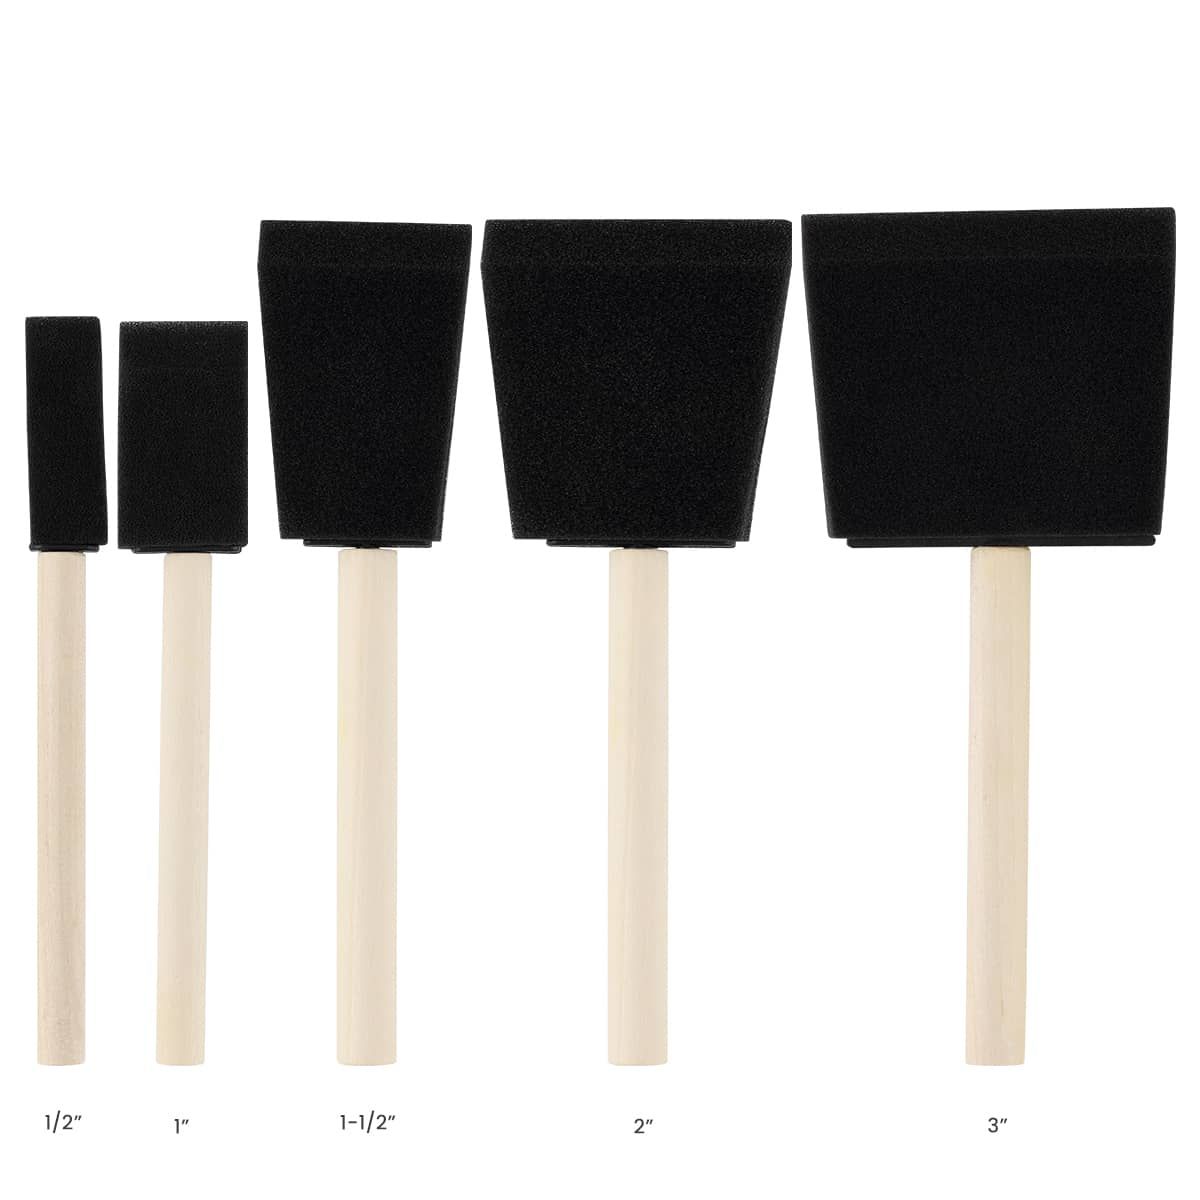 Assorted sized set available in 1/2", 1", 1-1/2", 2", and 3" foam brushes